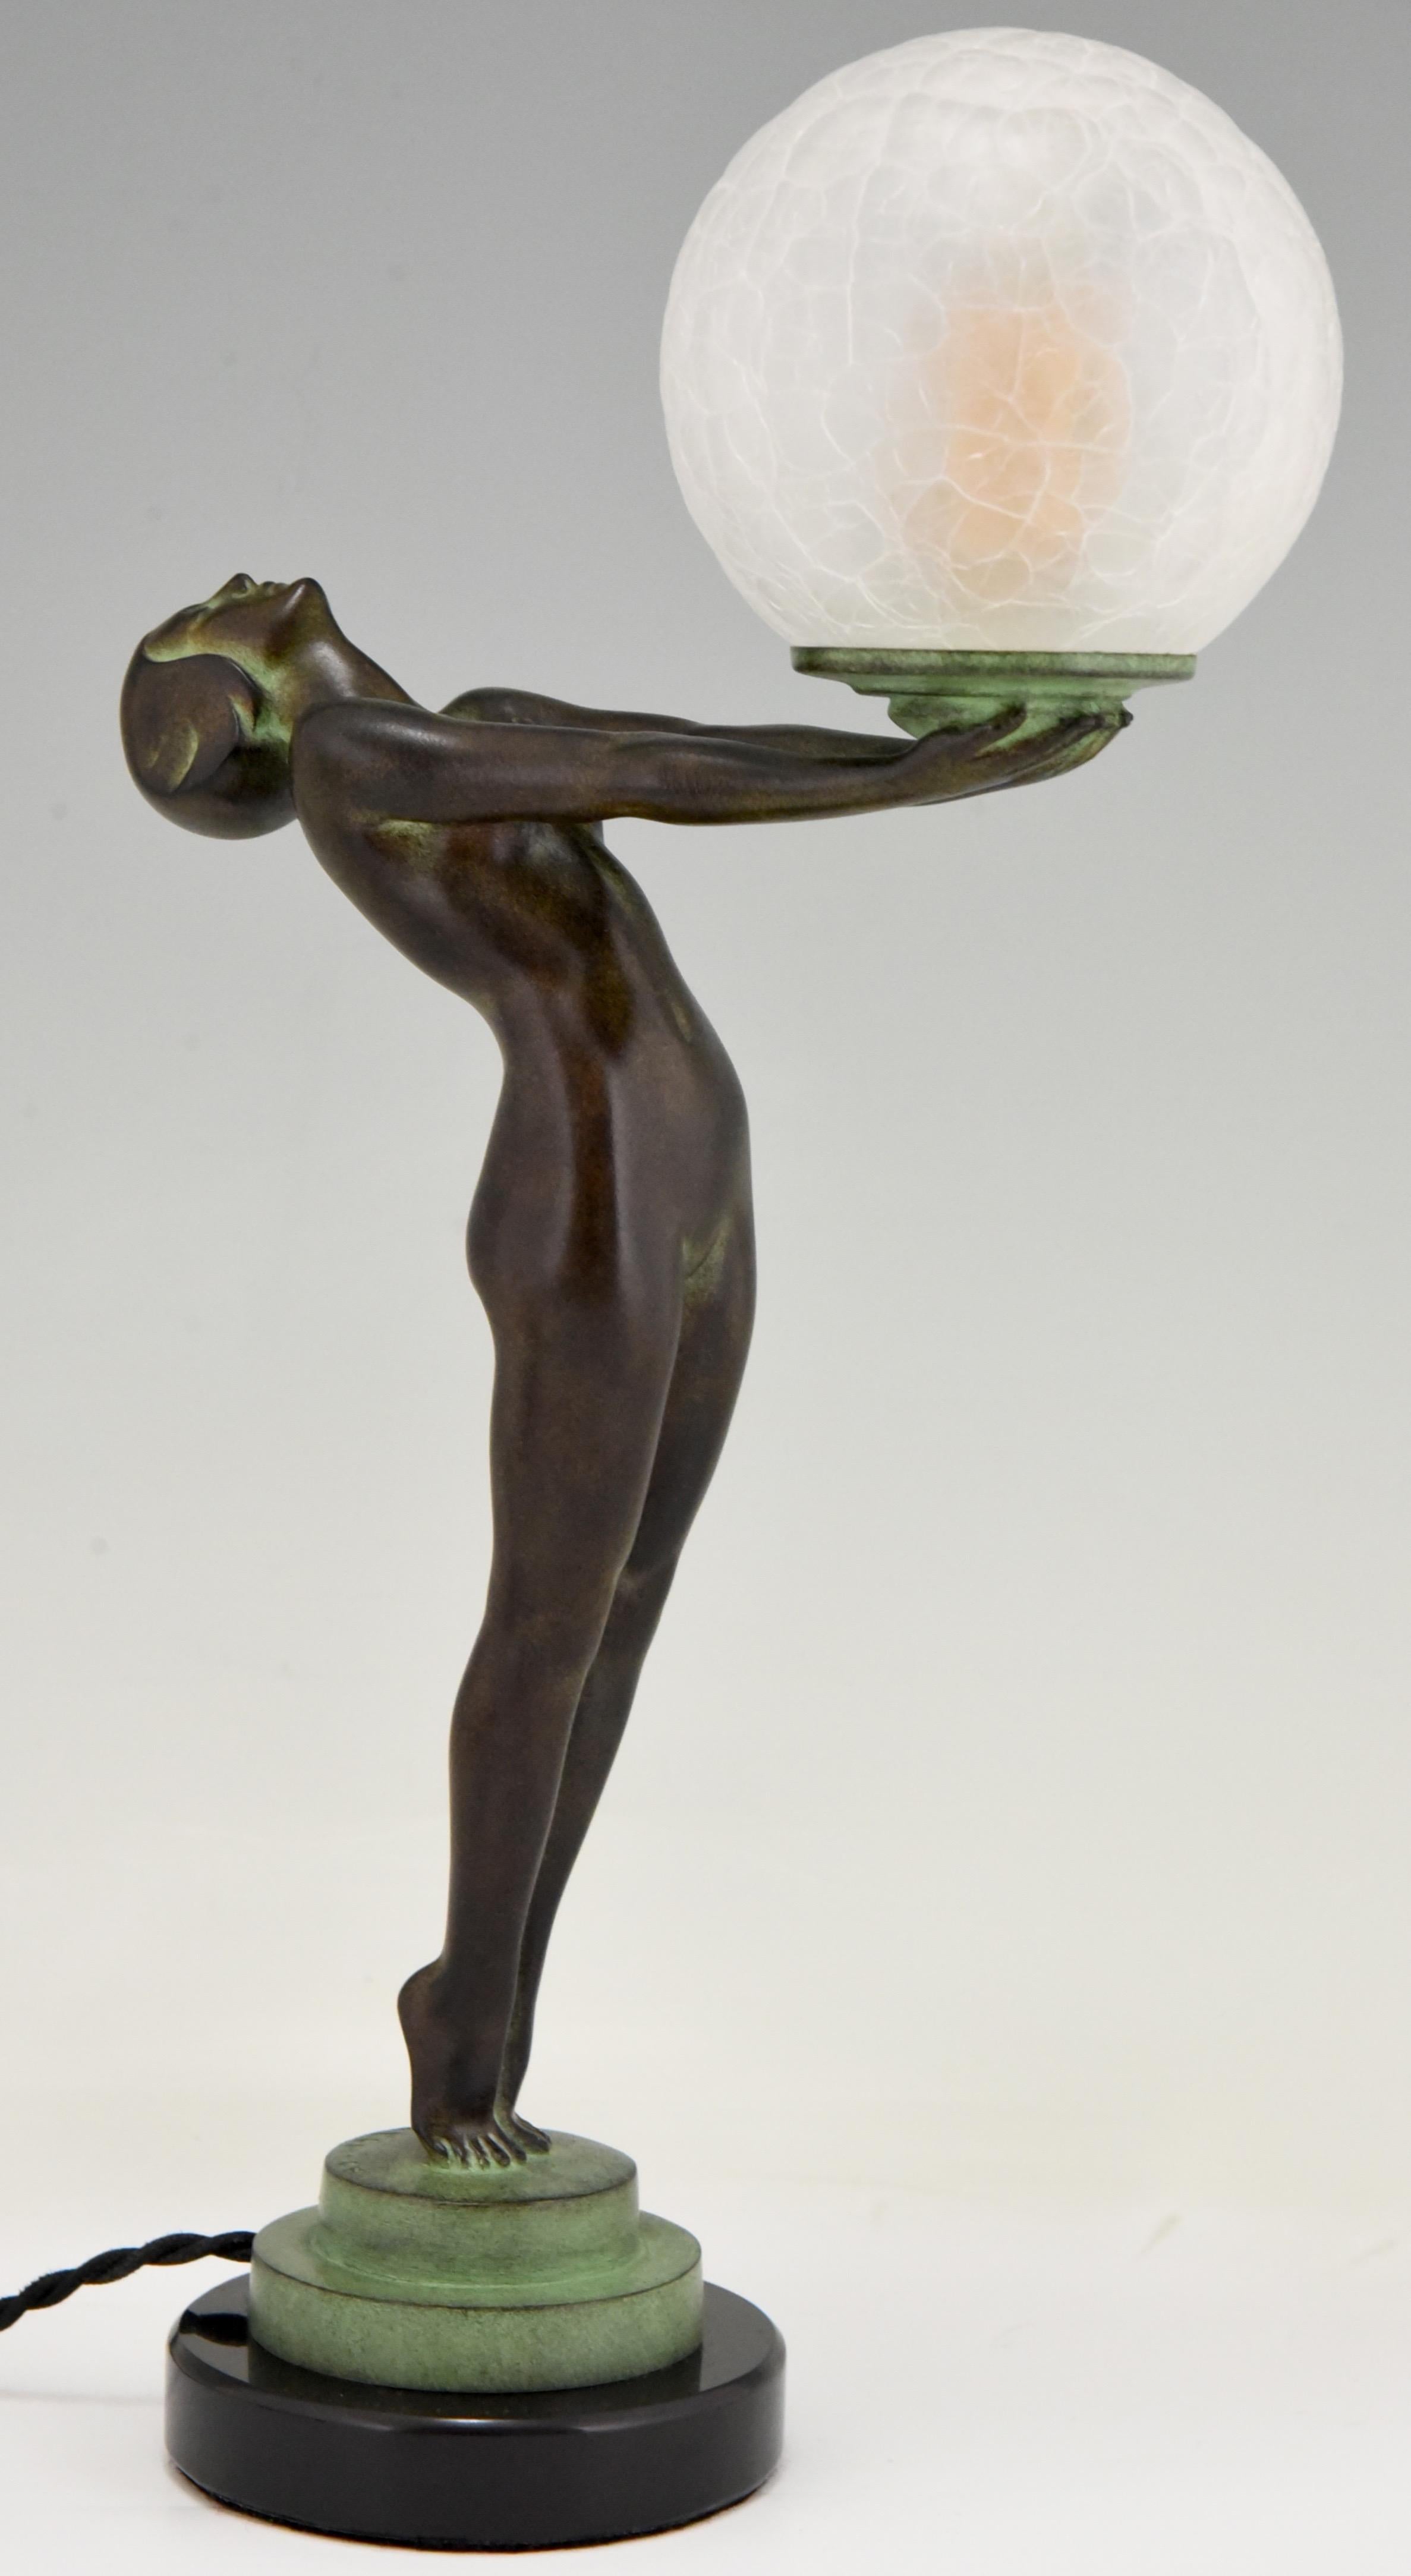 Contemporary Art Deco Style Lamp CLARTE Standing Nude Holding a Glass Shade Max Le Verrier 